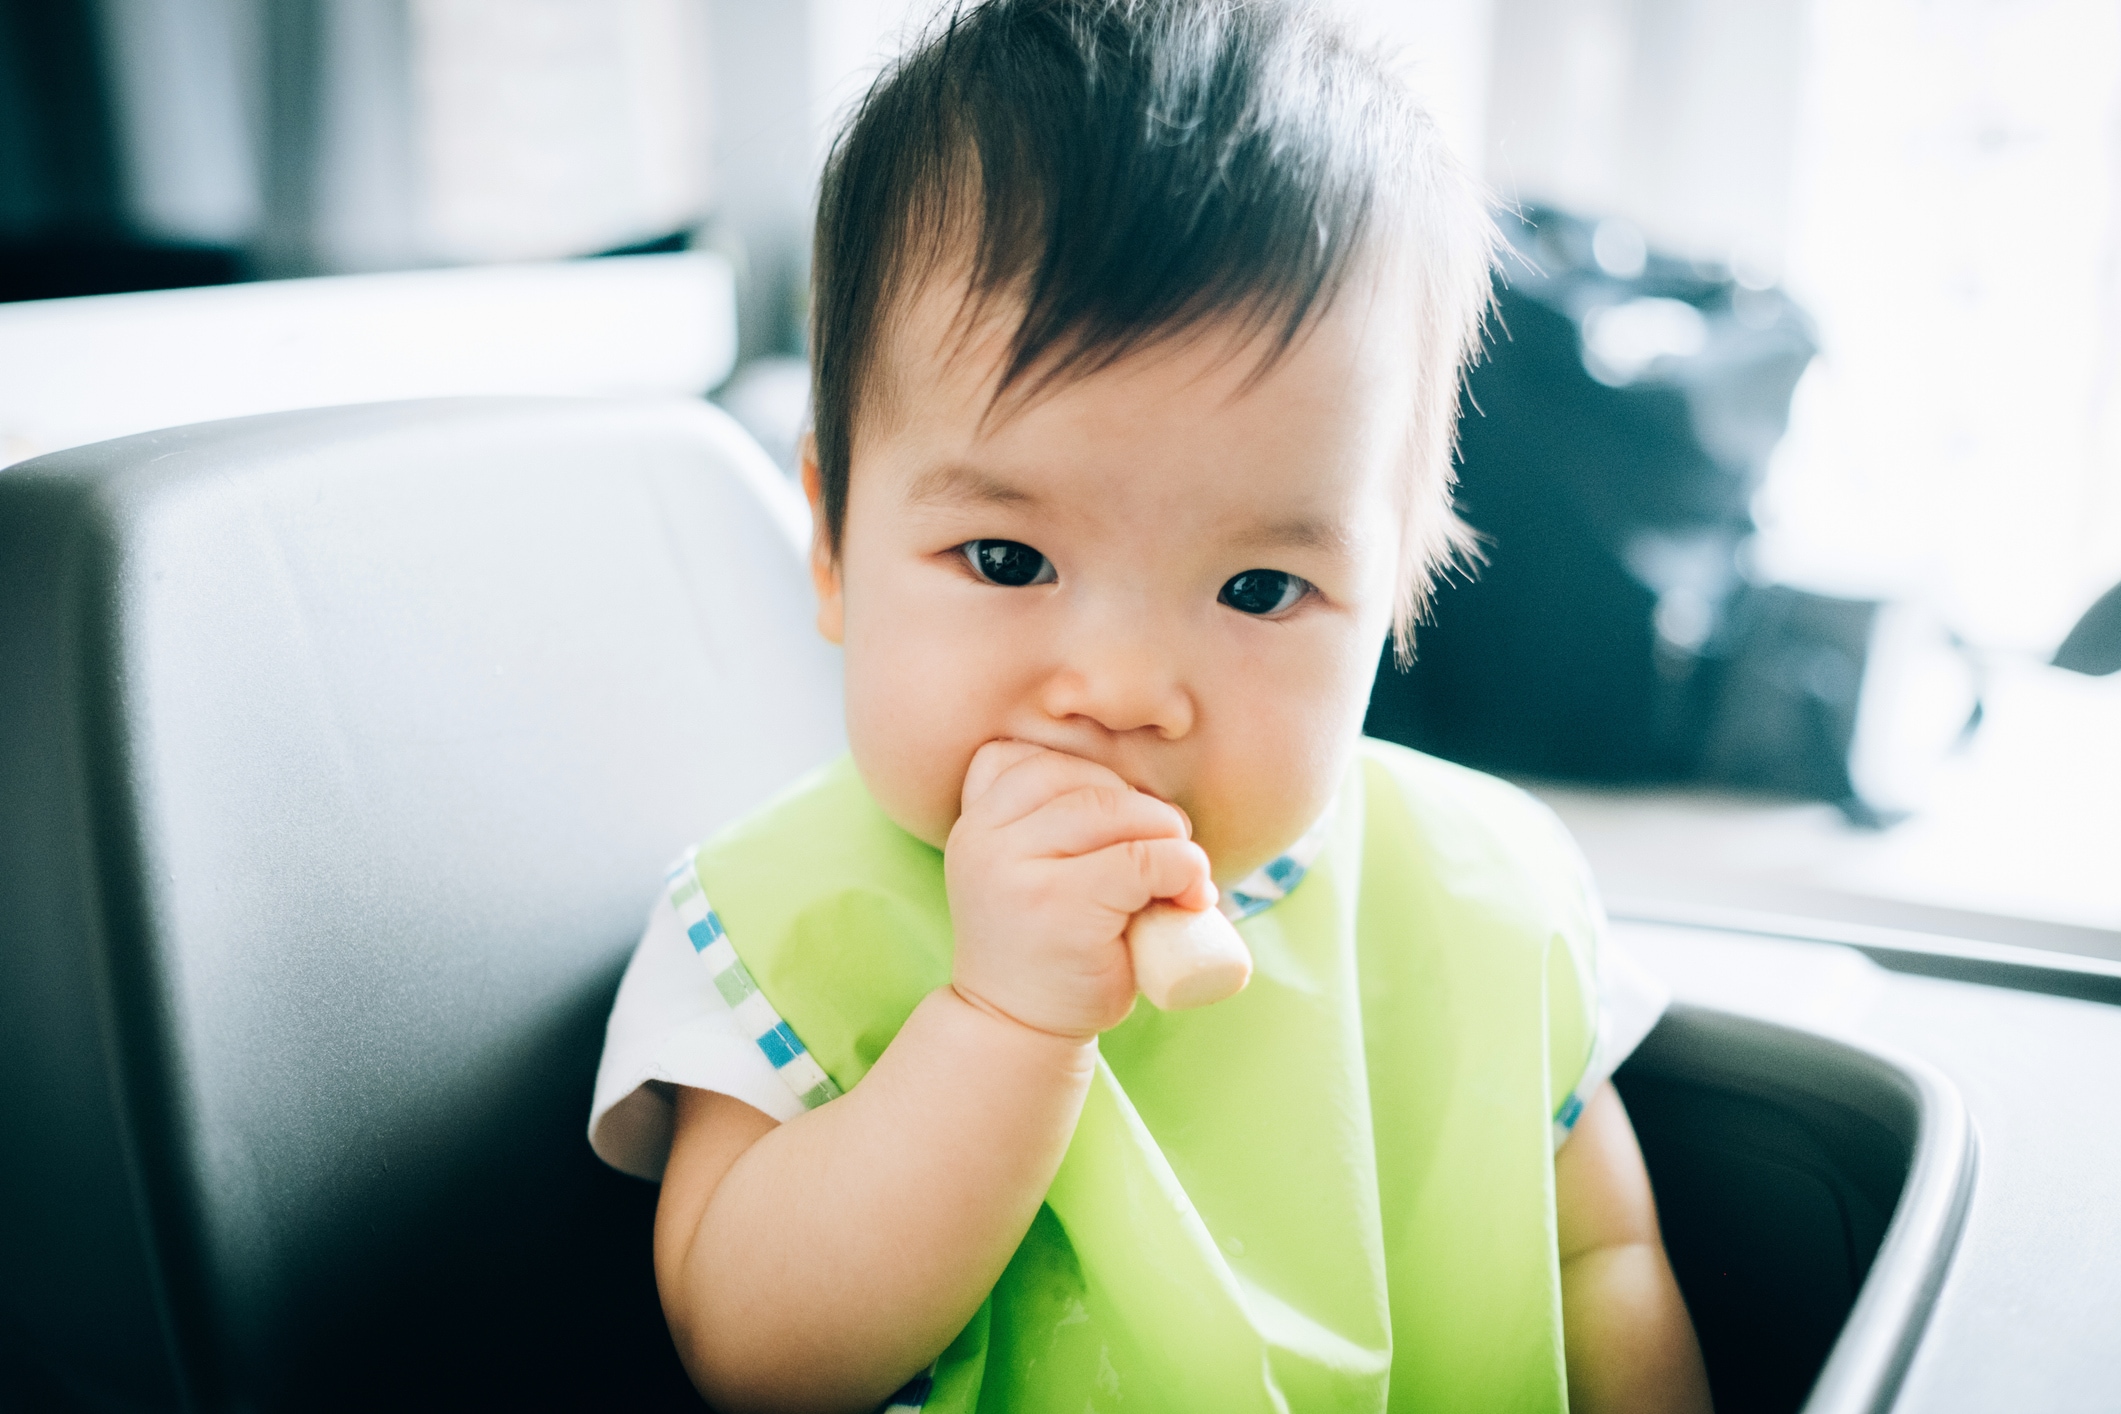 Common questions about teething at 3 months, answered